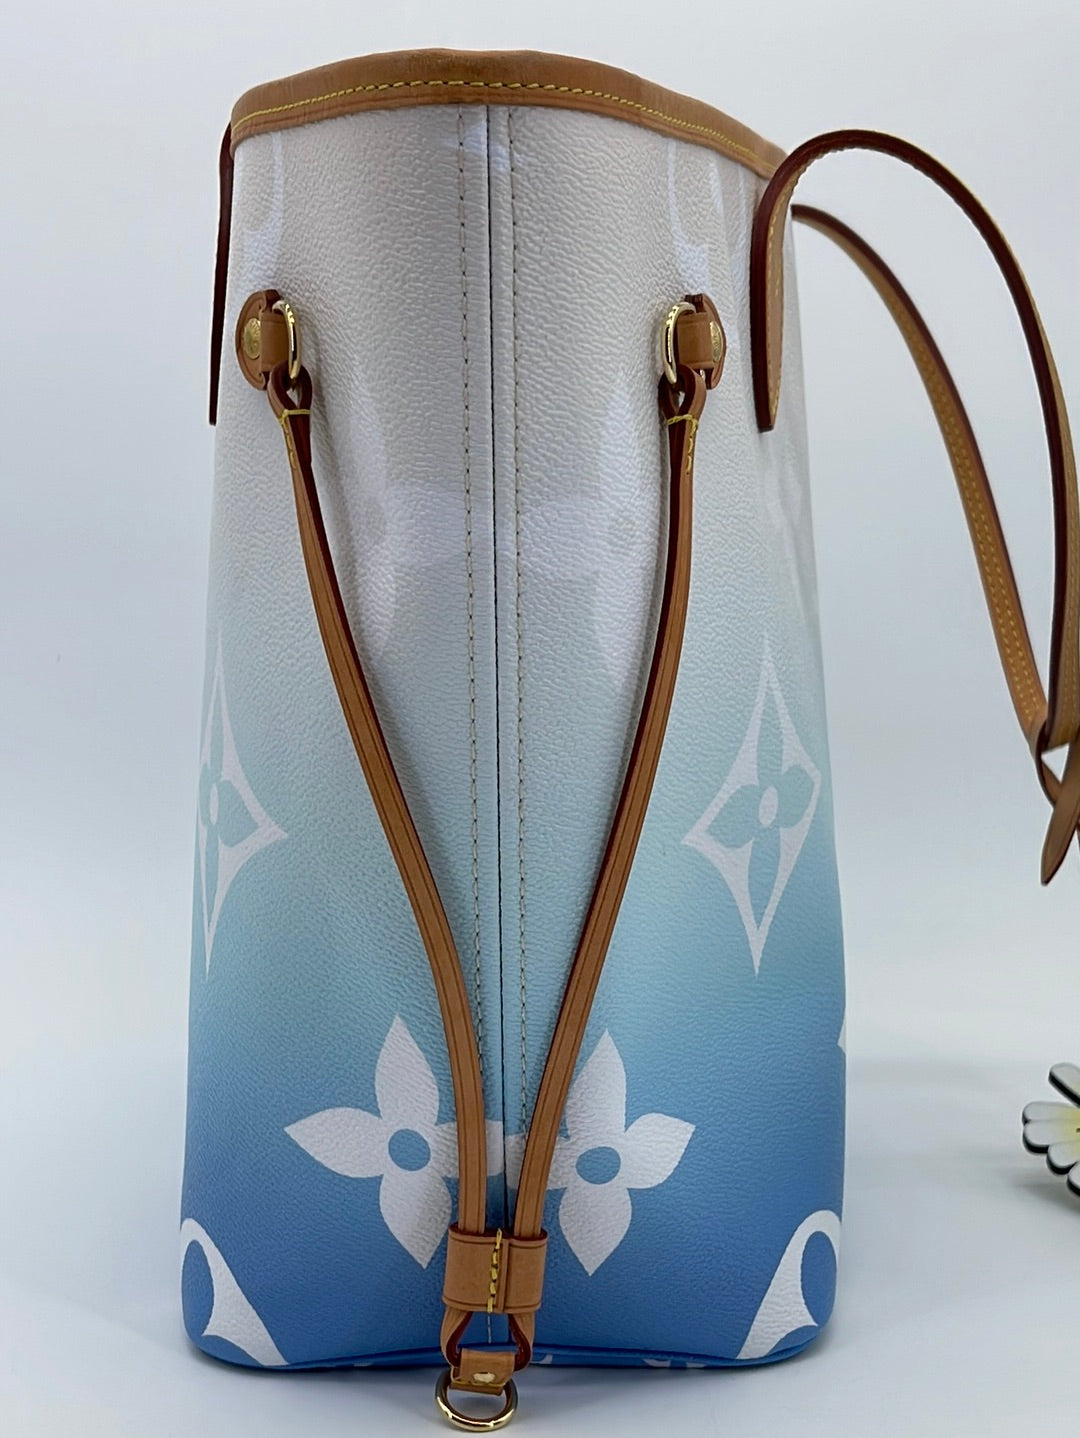 Sold at Auction: Louis Vuitton S/S 21 By the Pool Neverfull MM